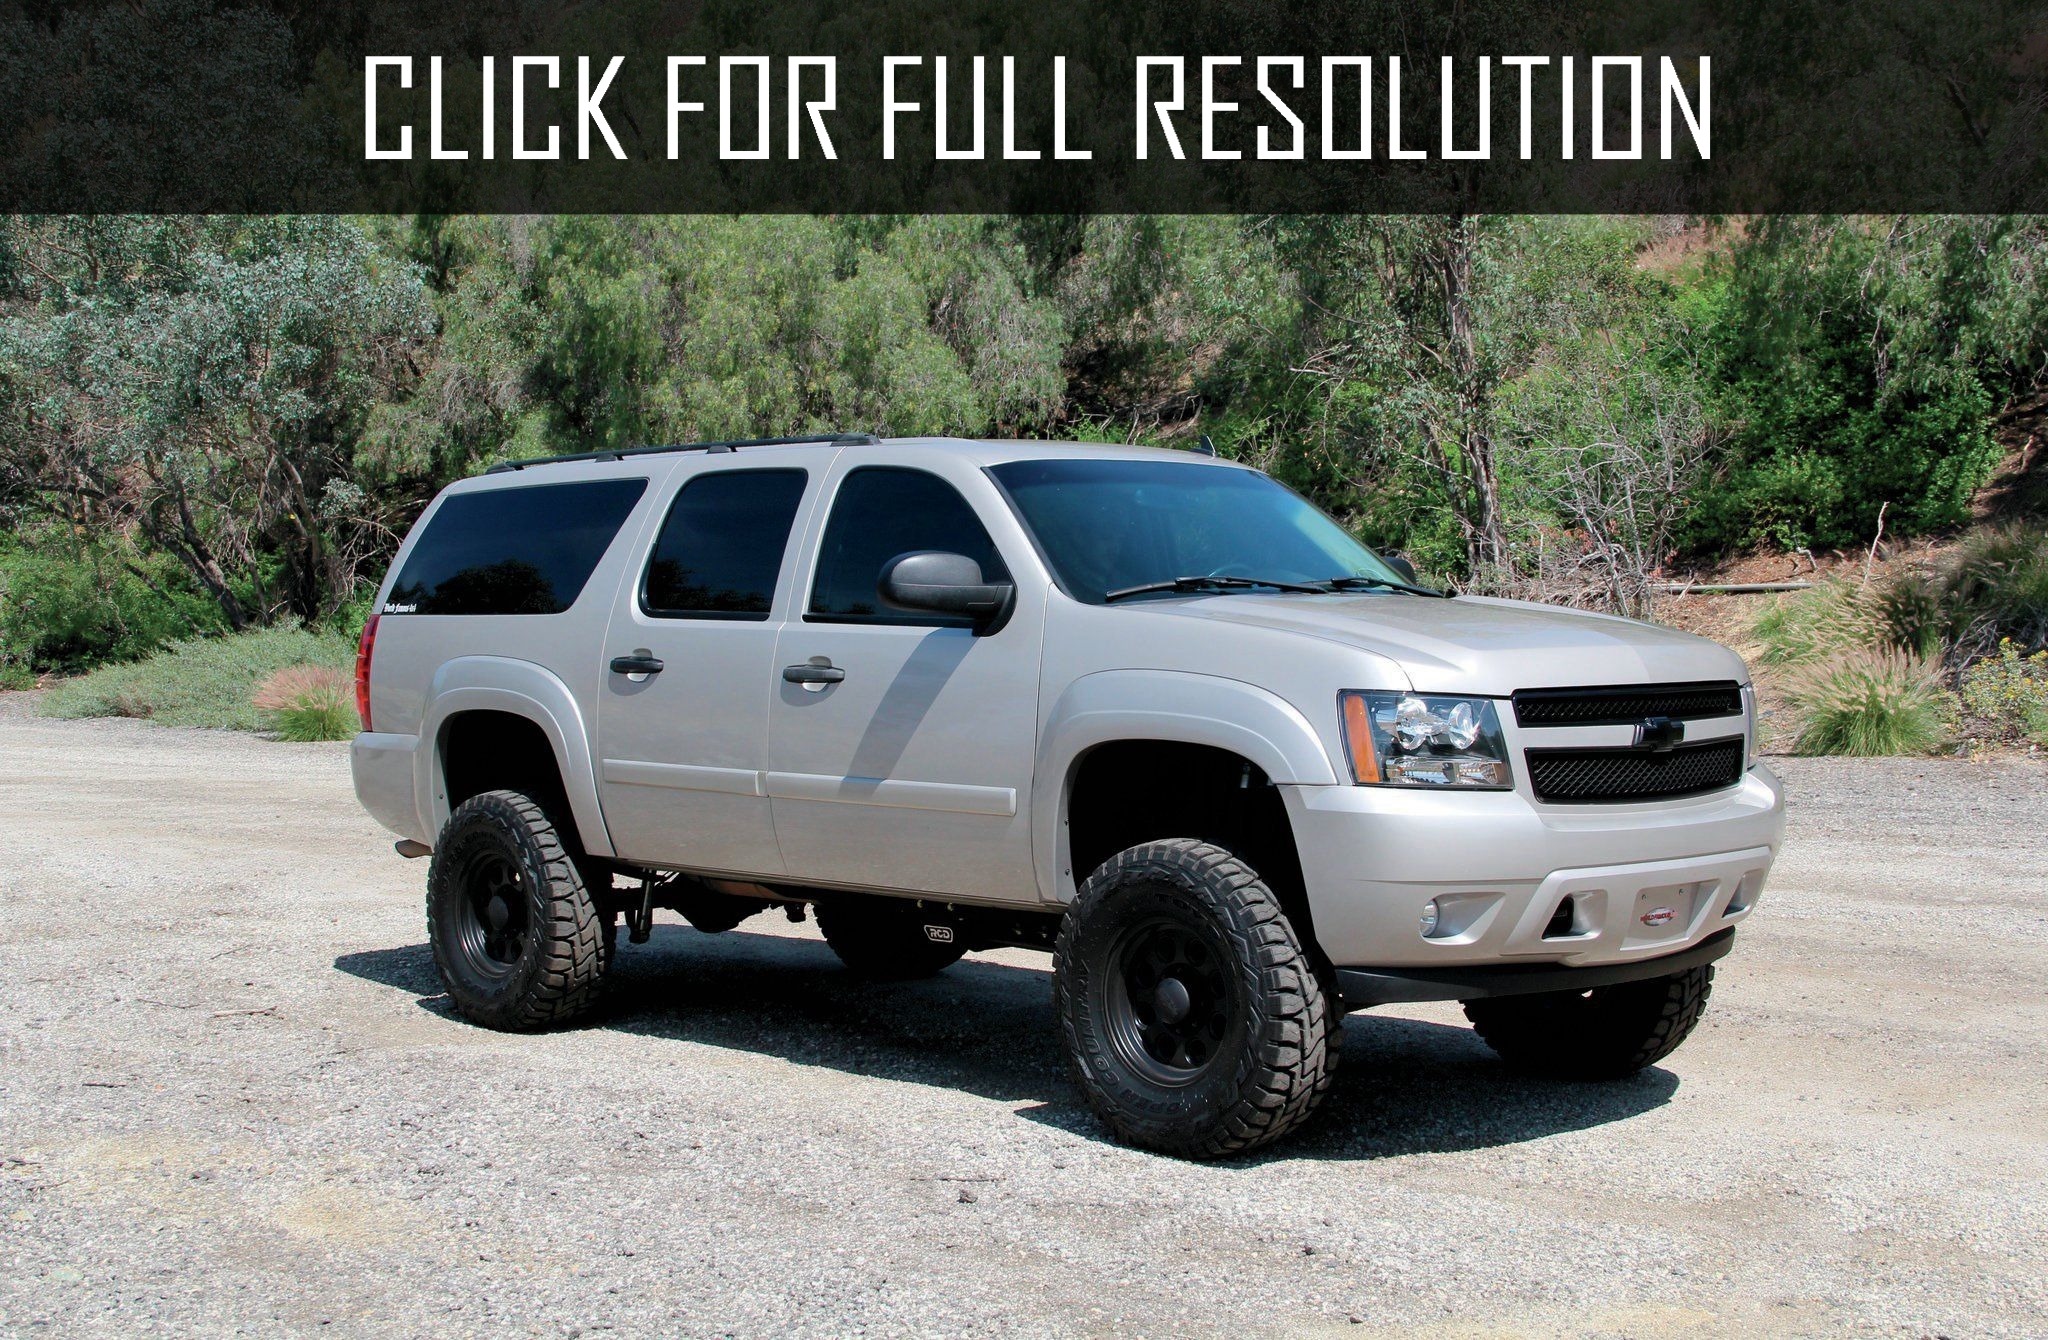 Chevrolet Suburban Lifted amazing photo gallery, some information and specifications, as well